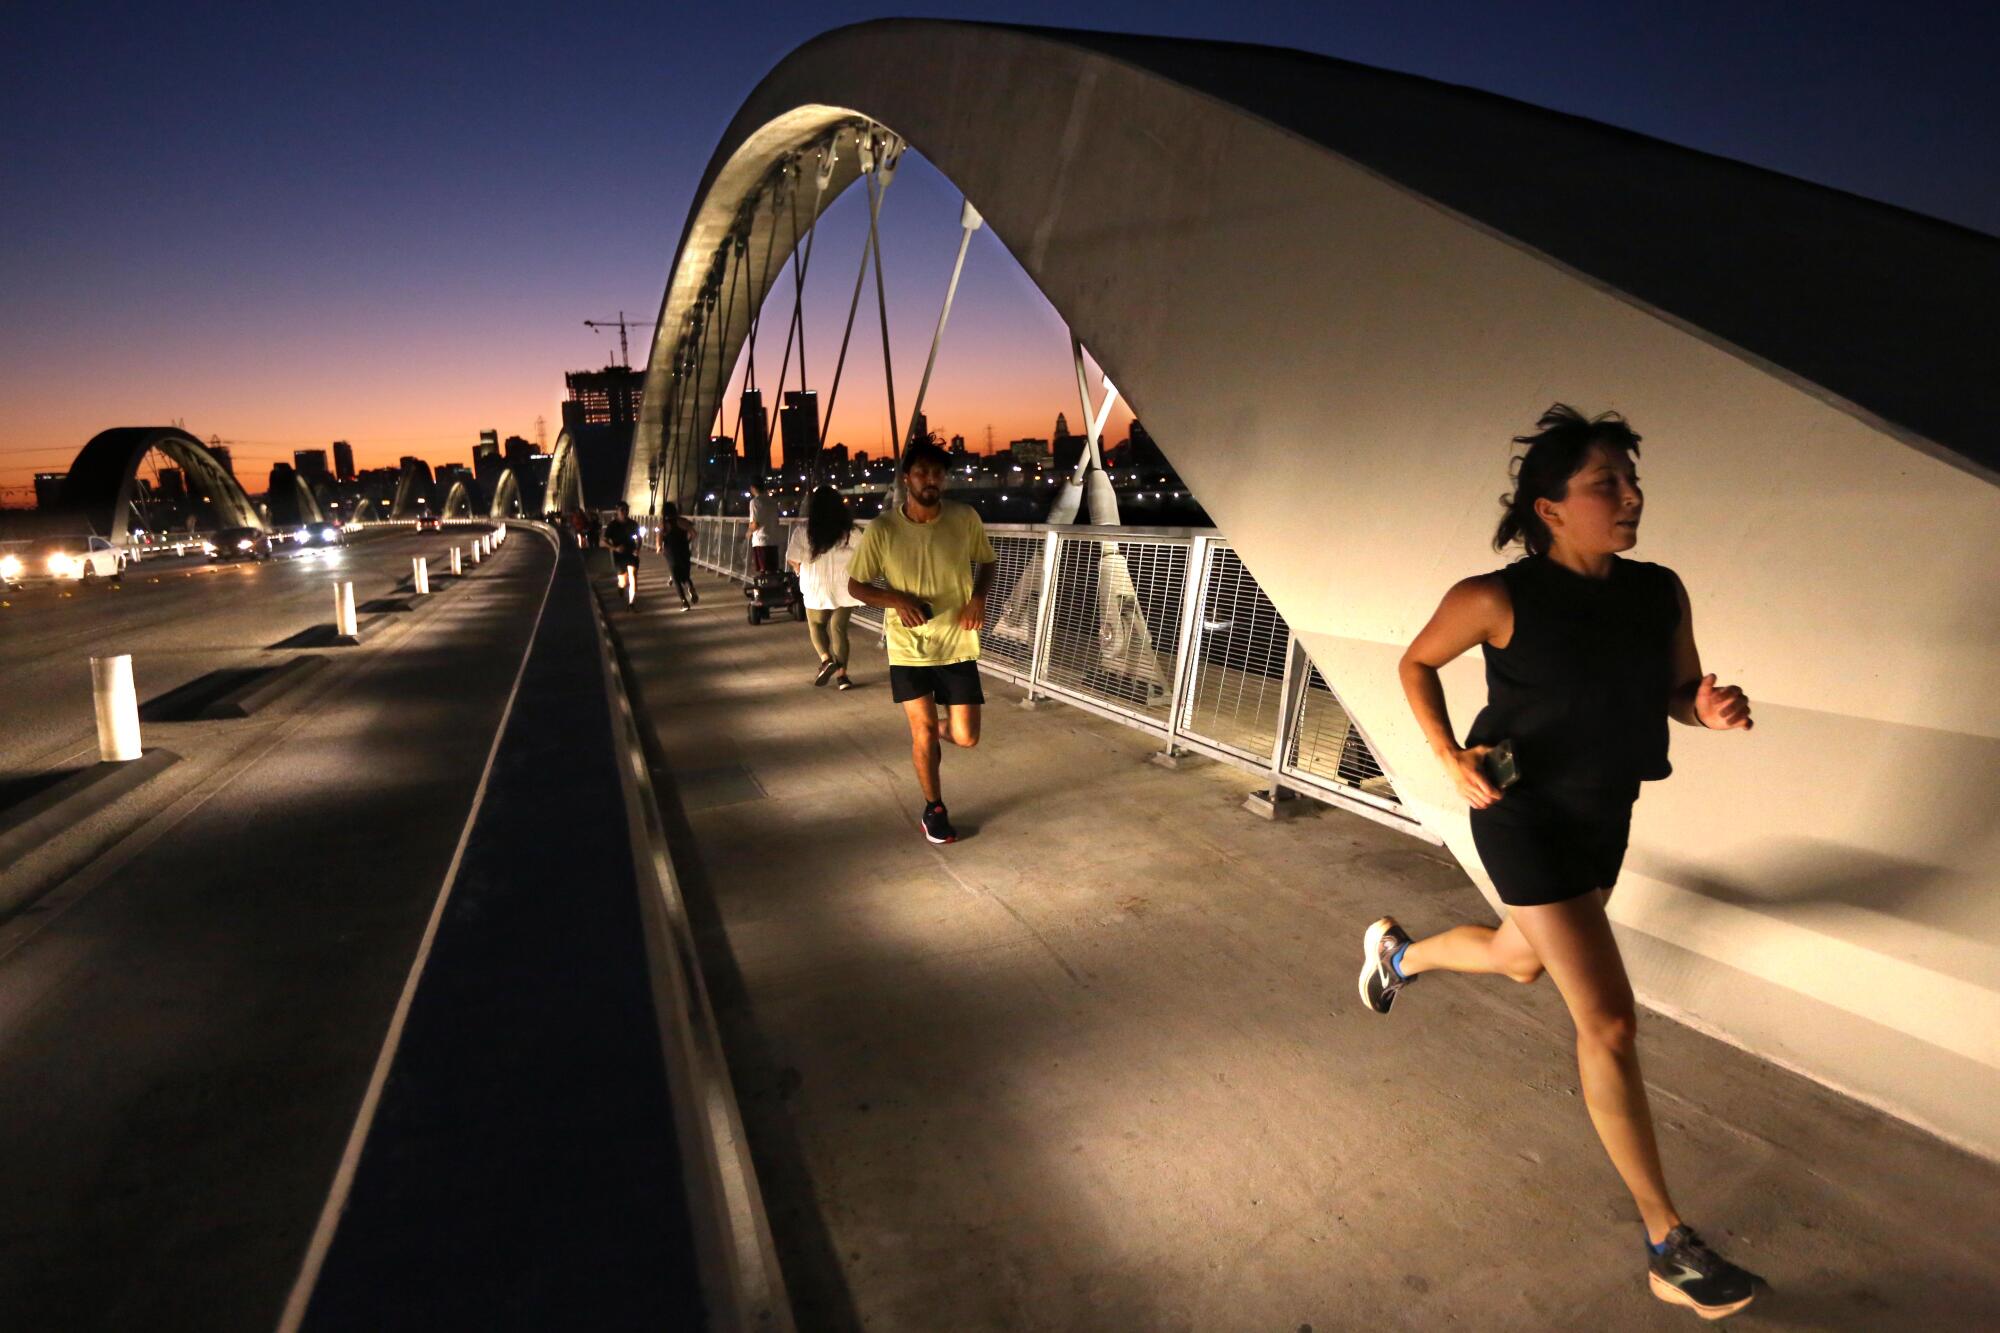 As dusk settles over Los Angeles members of The Boyle Heights Bridge Runners make their way across the Sixth Street Viaduct